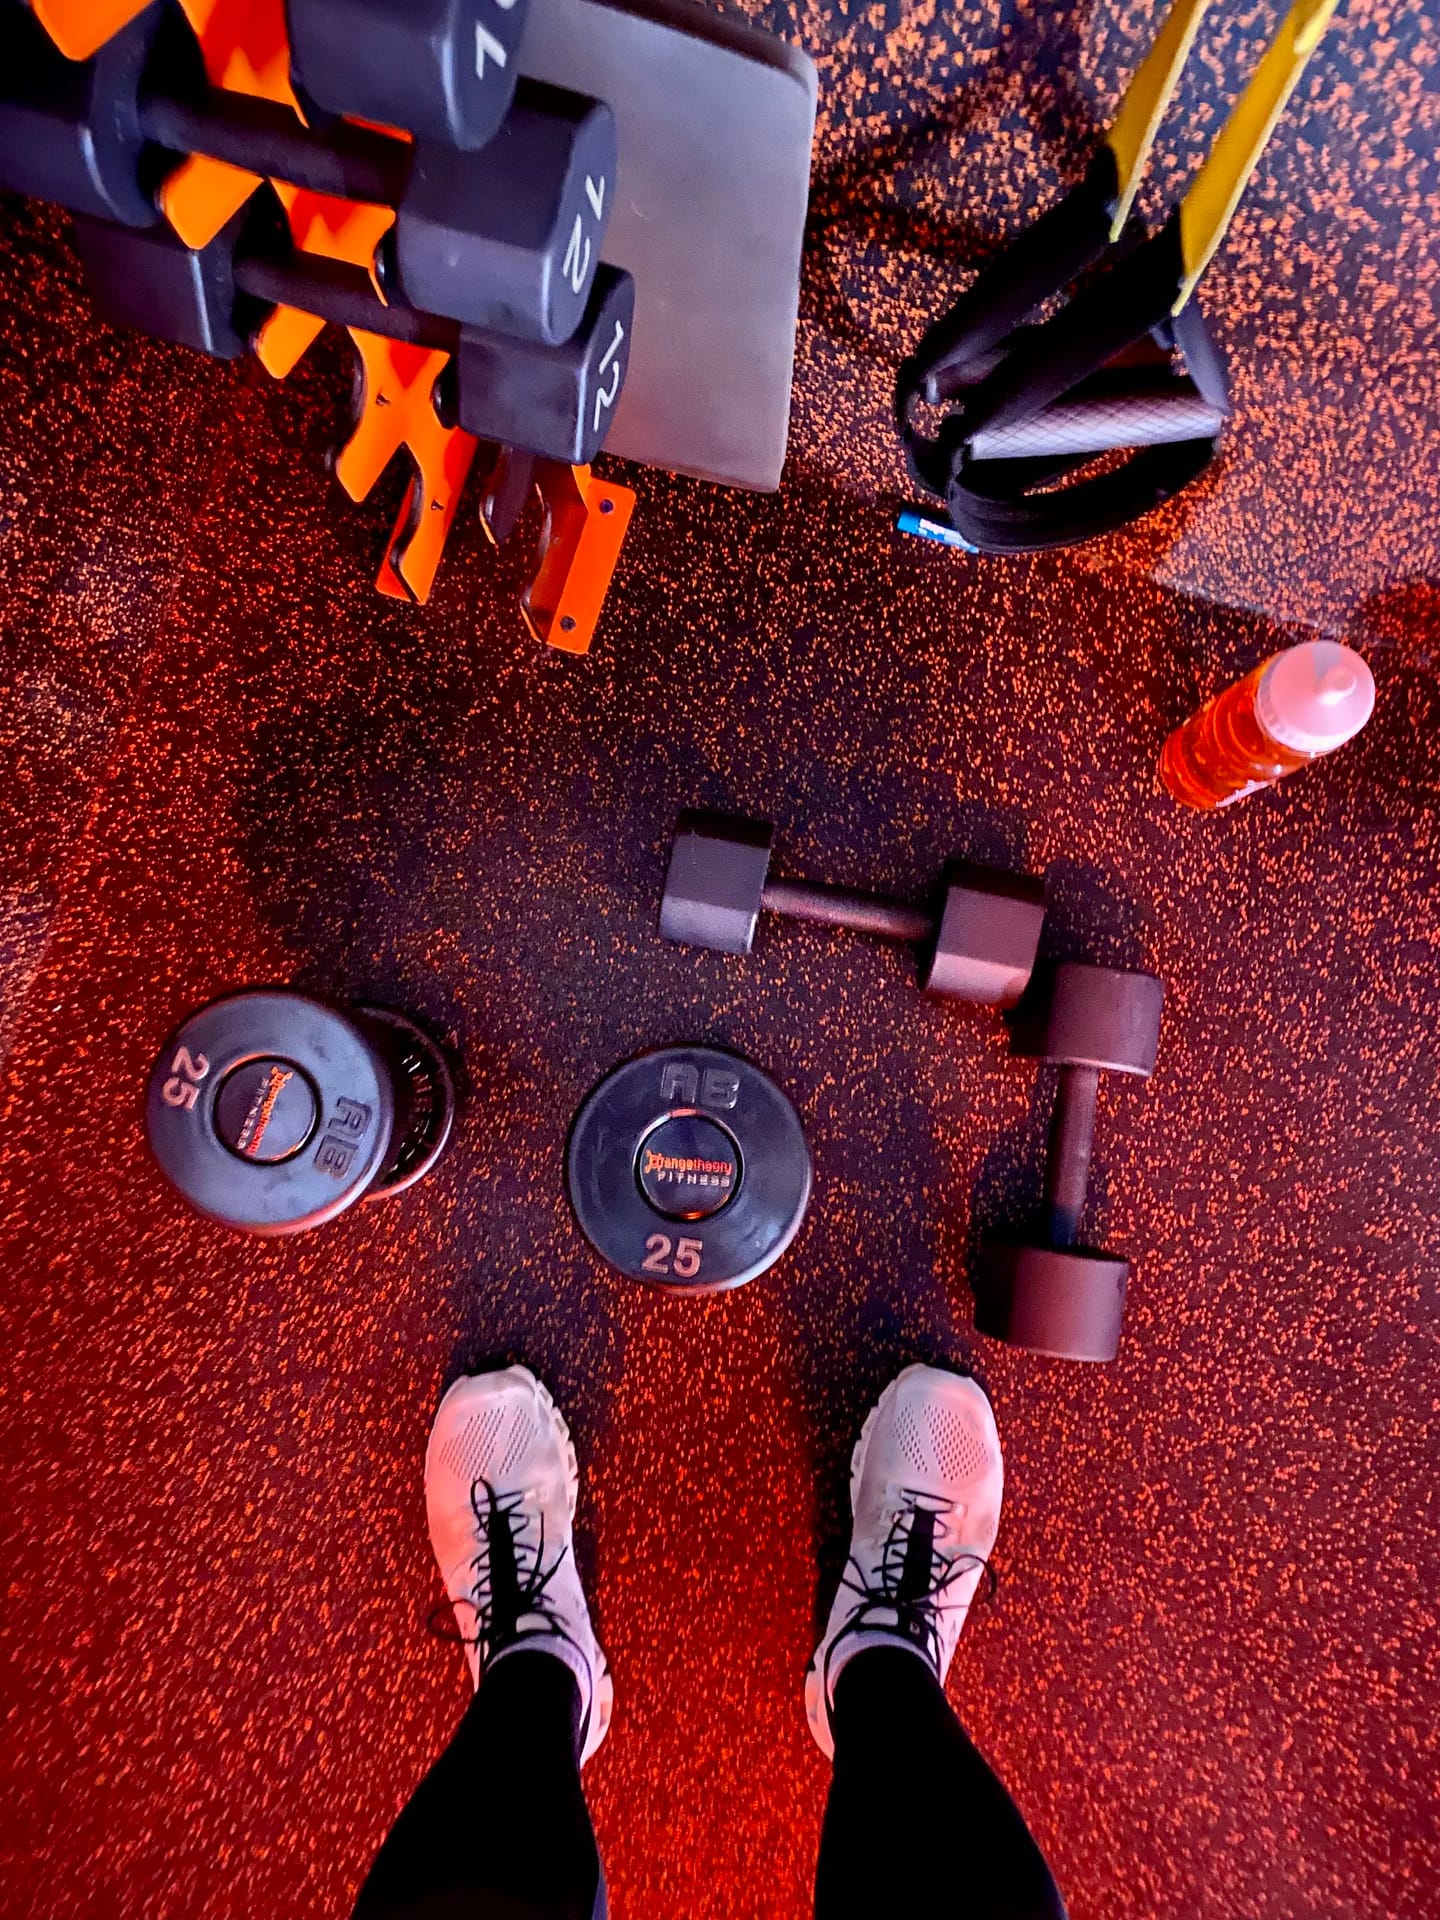 Get Fit And Energized With Orangetheory, Discover Powerful Workouts